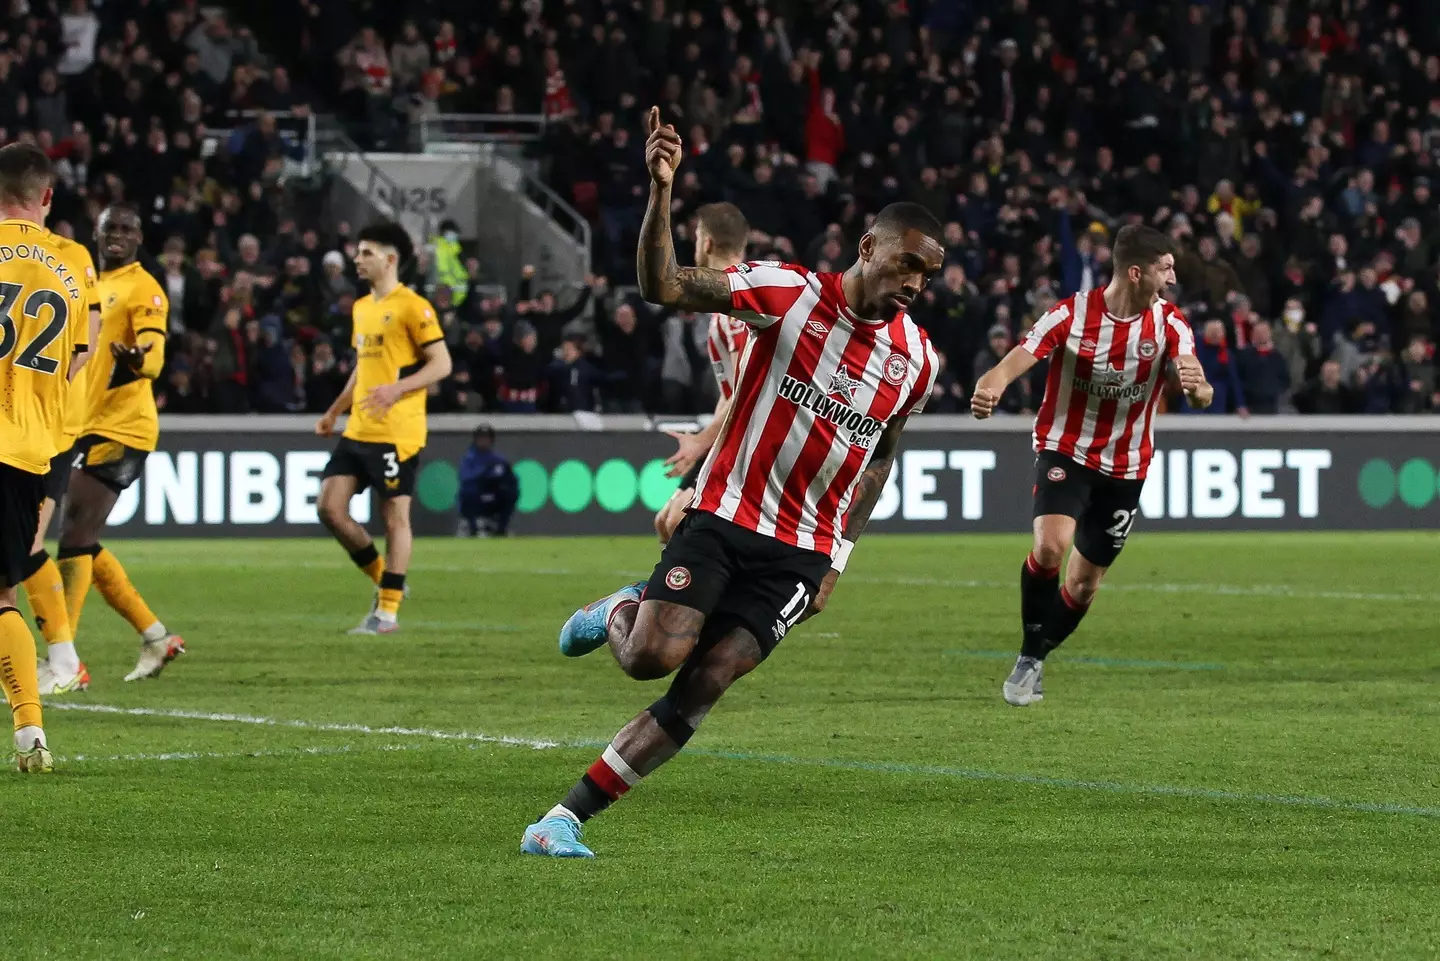 Toney has impressed in his first season in the Premier League with Brentford. Image: PA Images